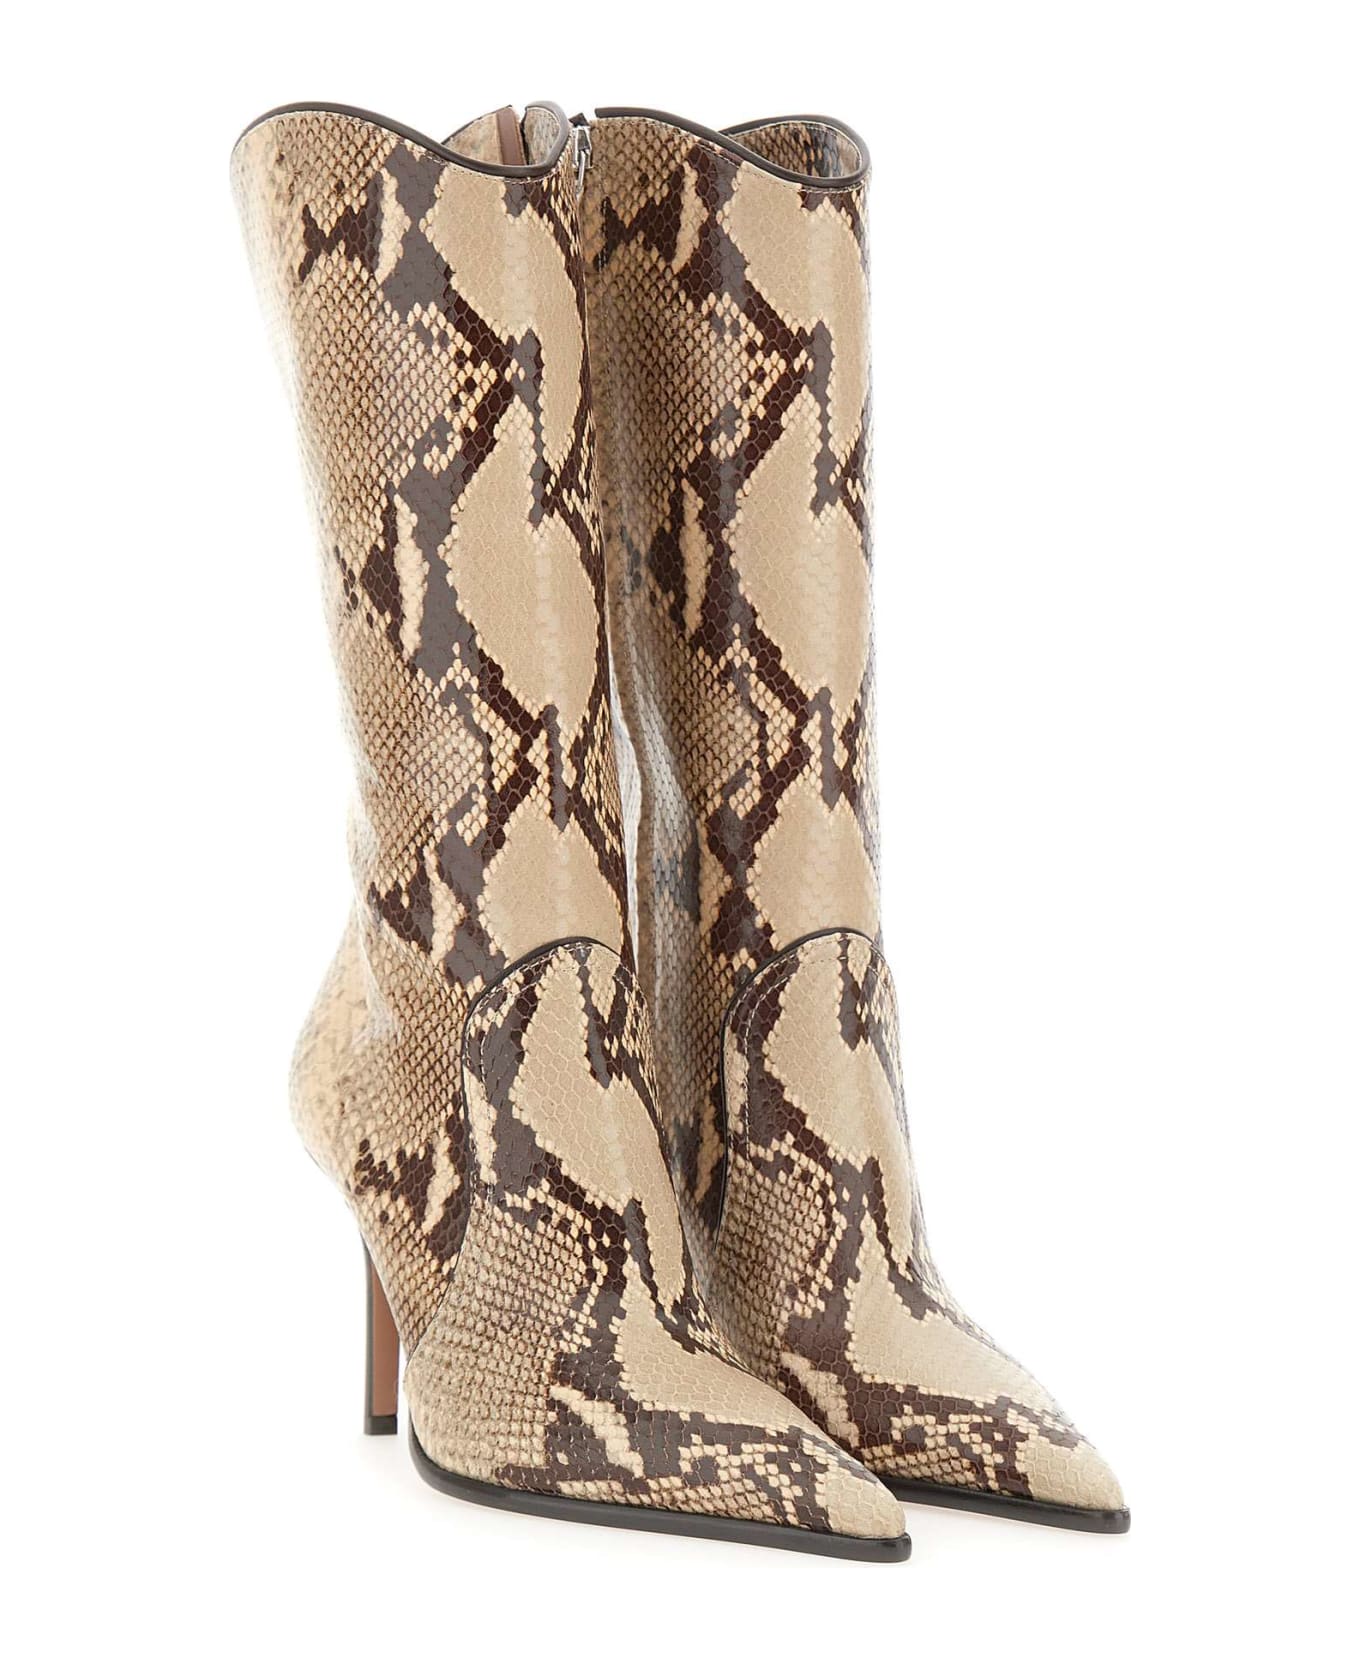 Paris Texas 'ahsley Midcalf' Leather Boots - BEIGE